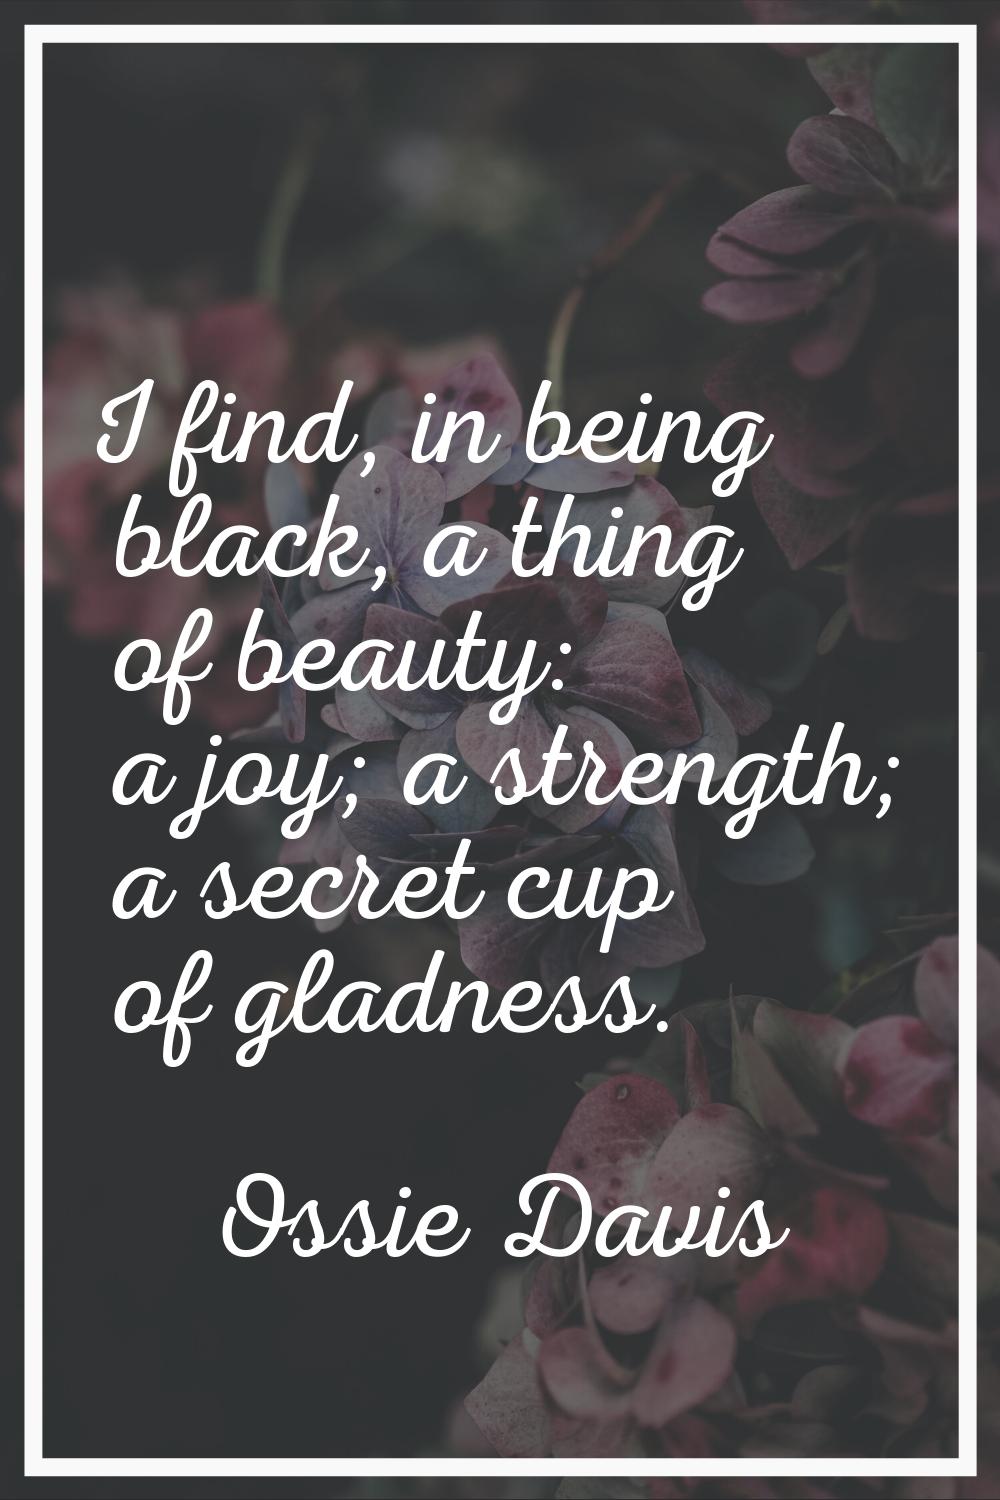 I find, in being black, a thing of beauty: a joy; a strength; a secret cup of gladness.